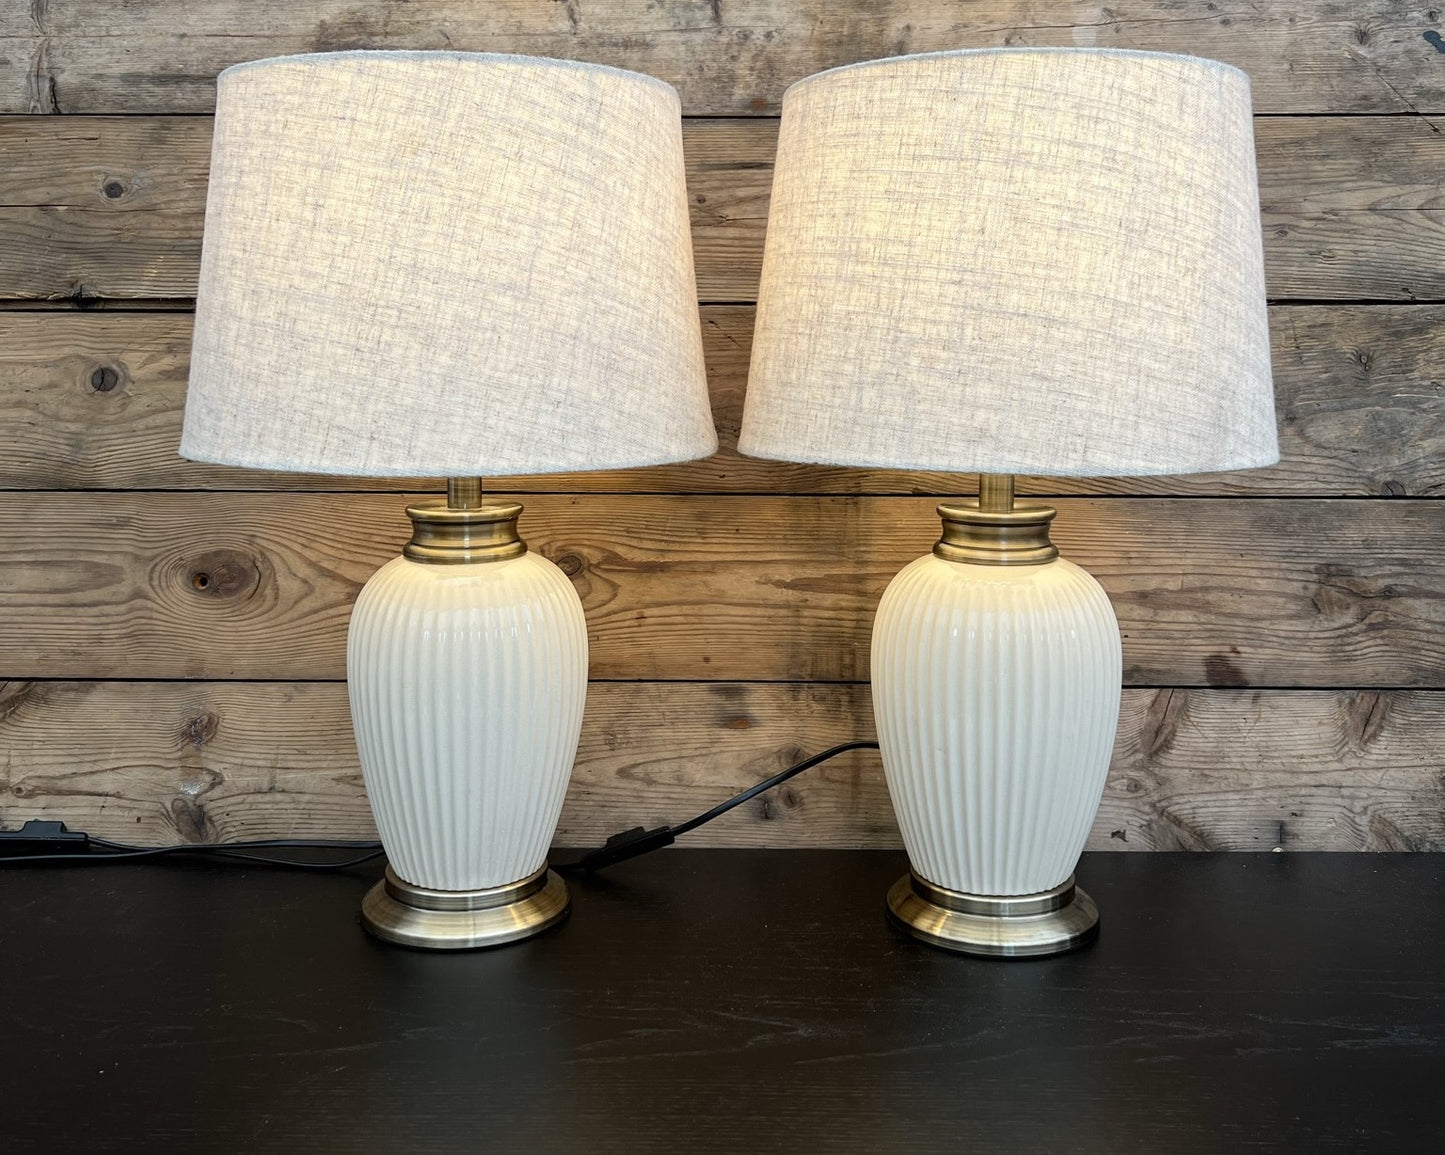 2x Retro Home Lamp PAIR Desk Side Lamp Vintage Classic Style Table lamps